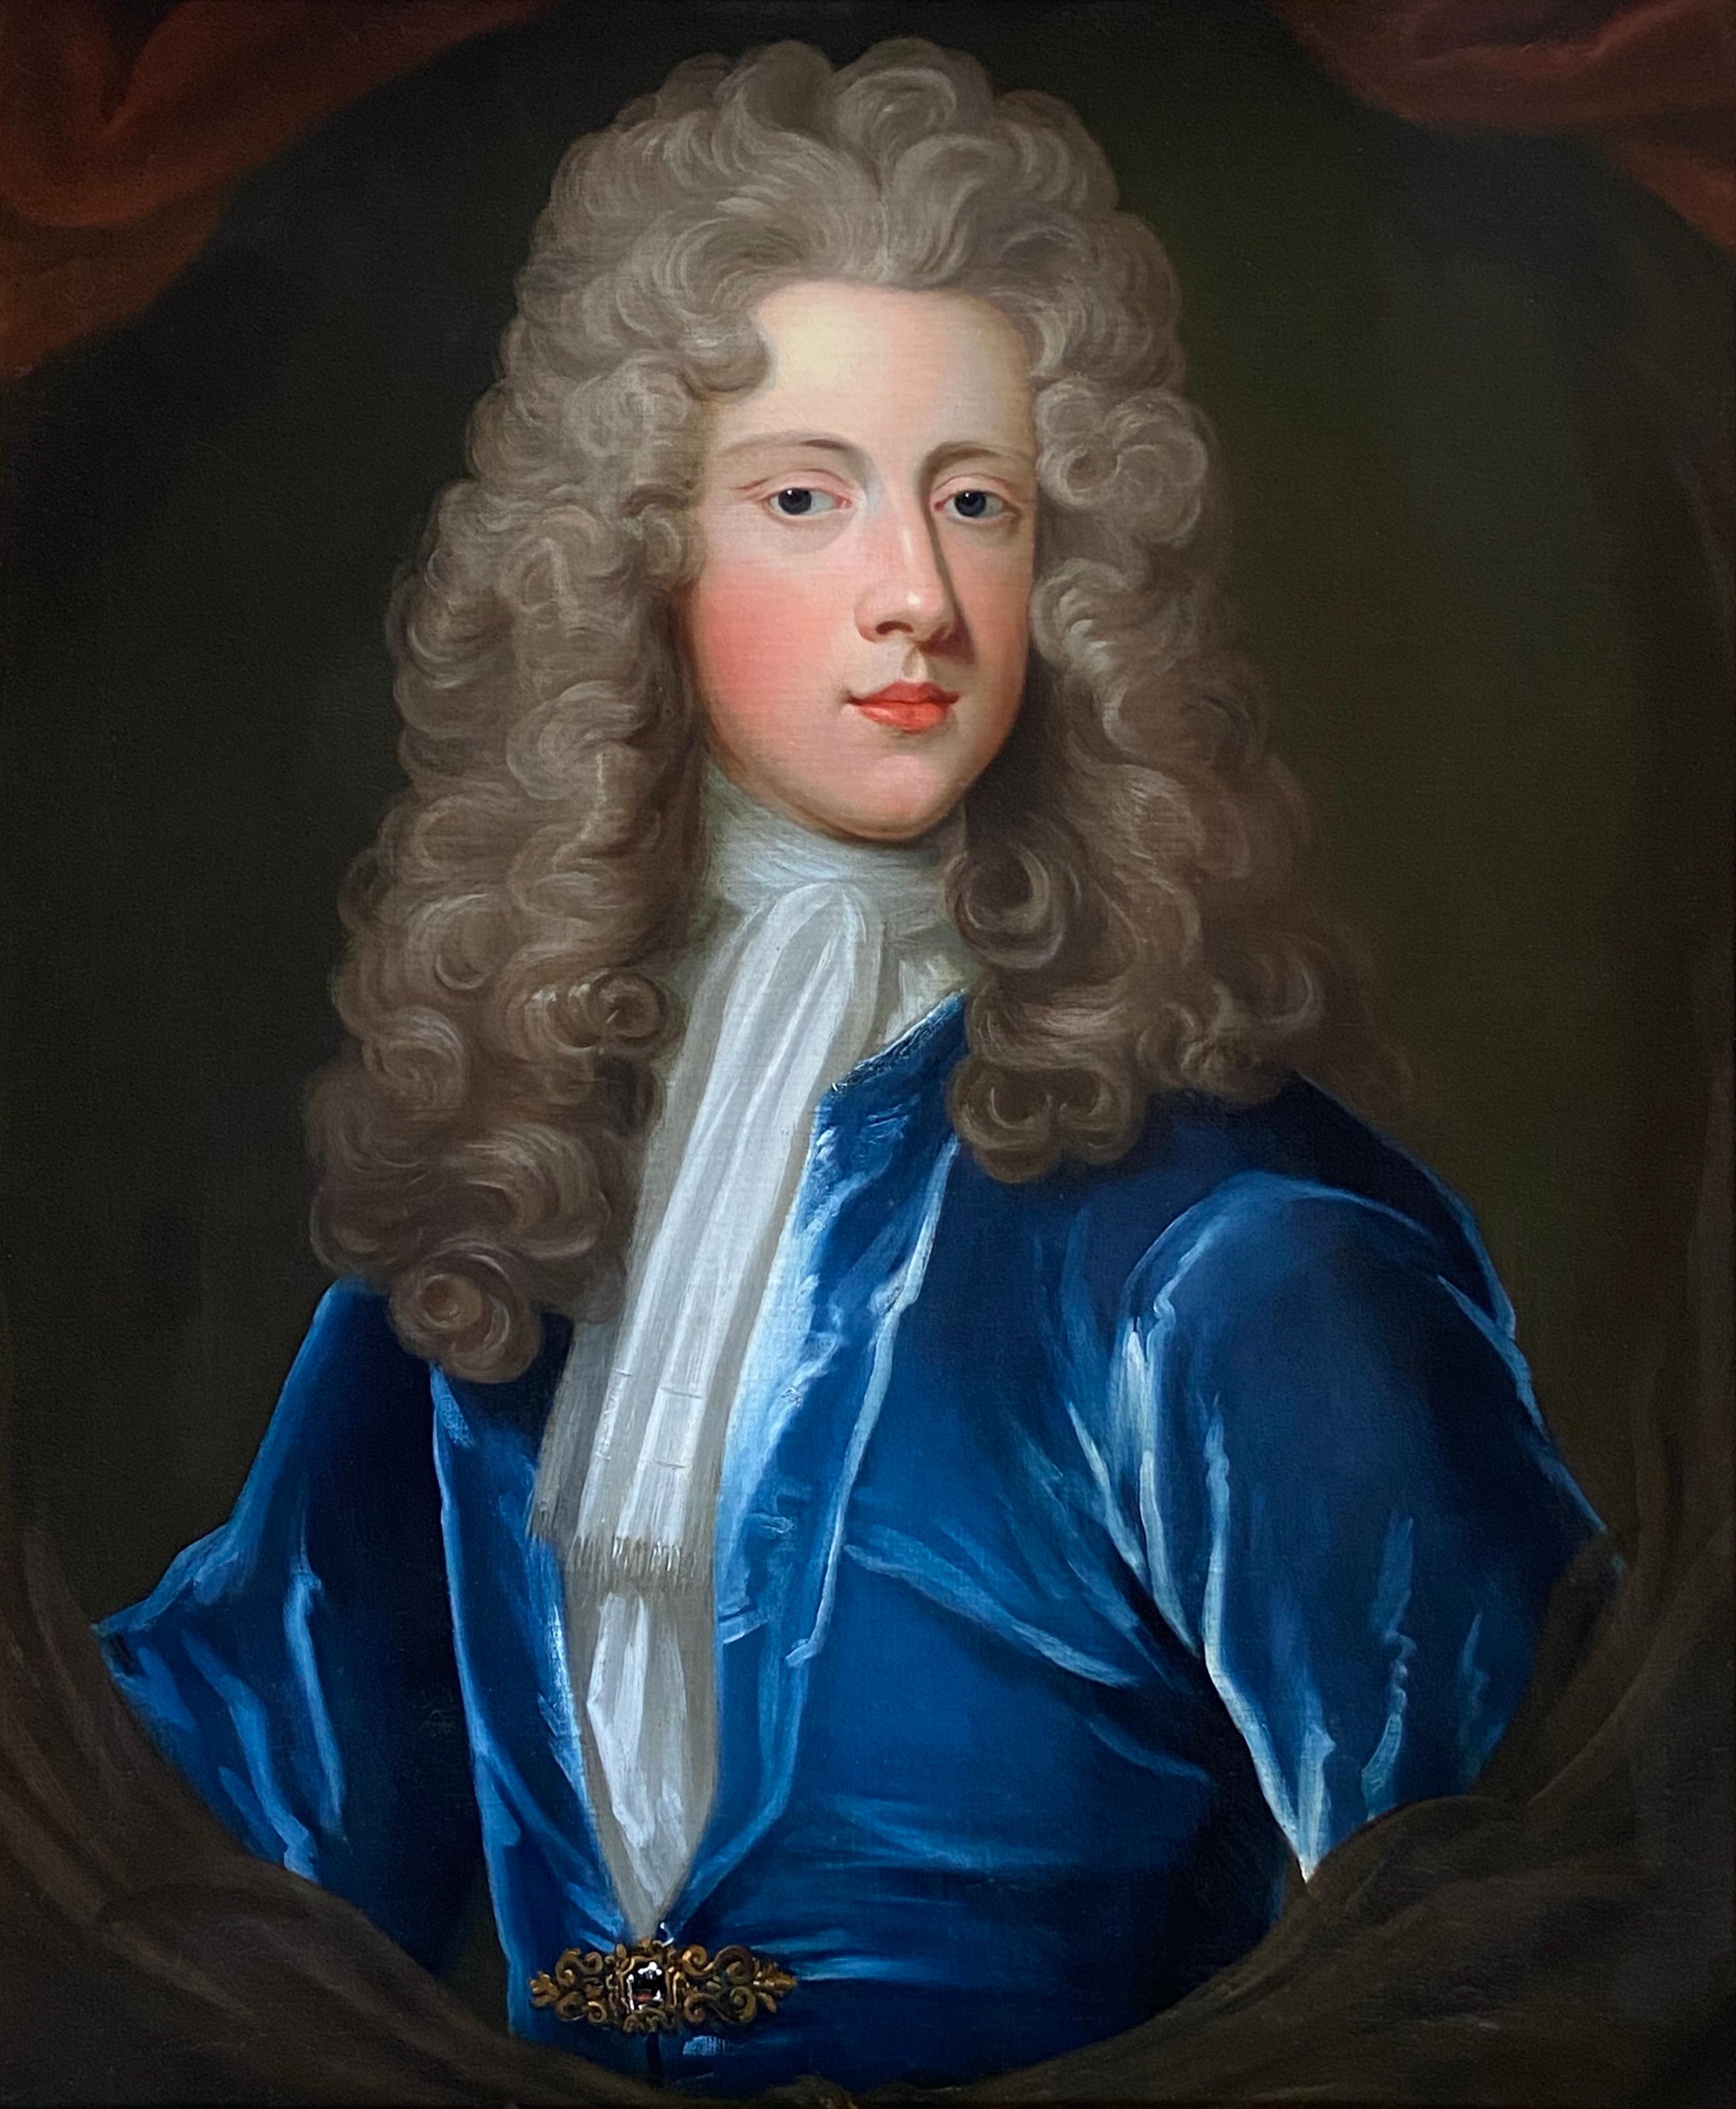 Attributed to Charles D'Agar  Interior Painting - 18TH CENTURY ENGLISH OIL PORTRAIT OF A YOUNG GENTLEMAN IN A BLUE VELVET COAT